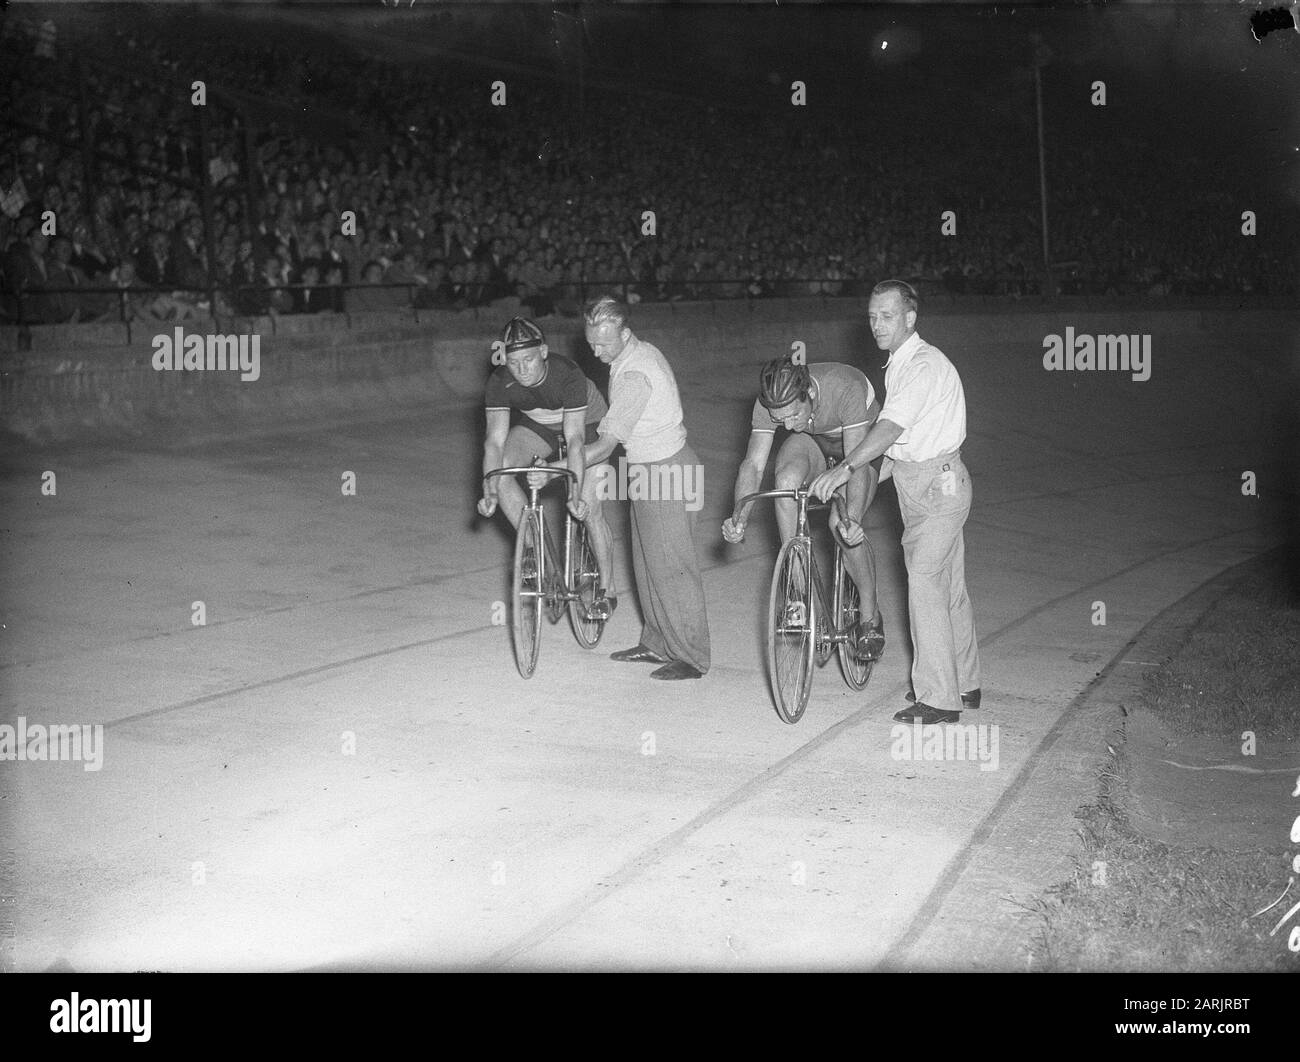 Cycling race stadium Date: August 27, 1947 Keywords: Stadion, cycling races Stock Photo